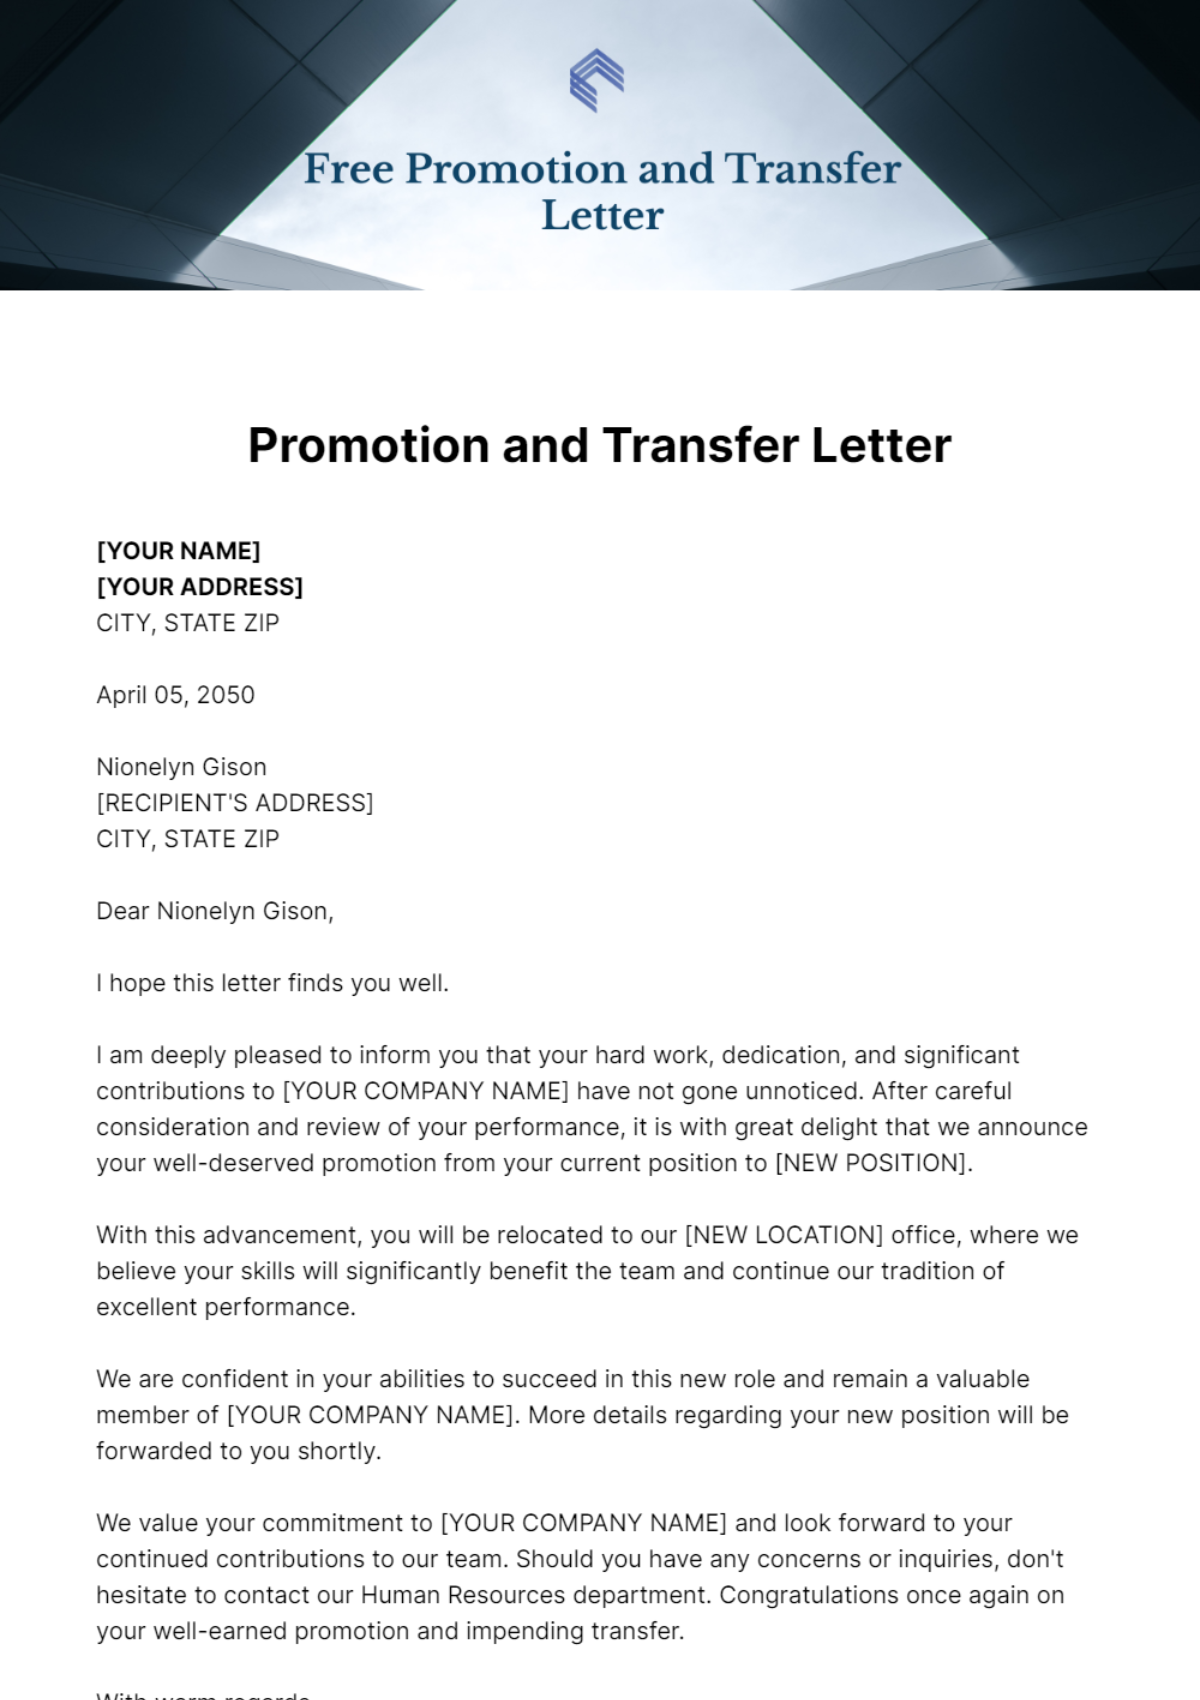 Free Promotion and Transfer Letter Template